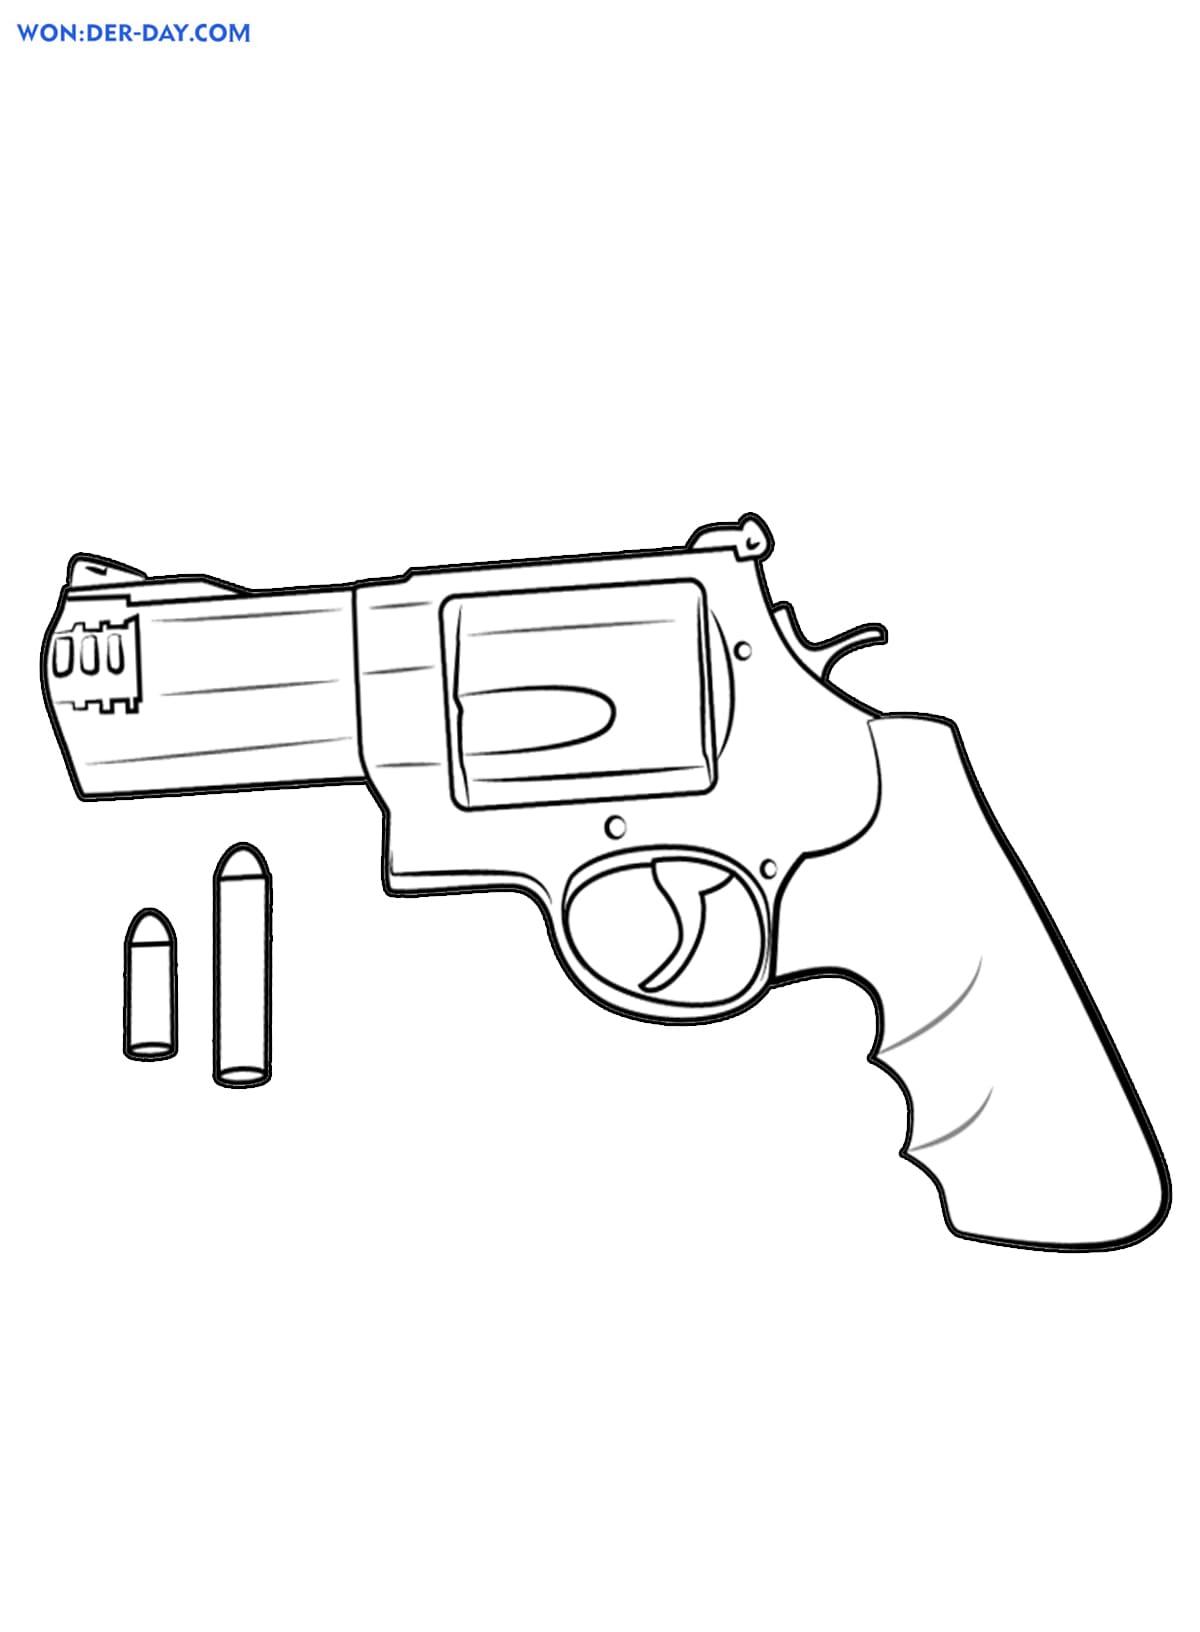 Weapon coloring pages . Print for boys | WONDER DAY